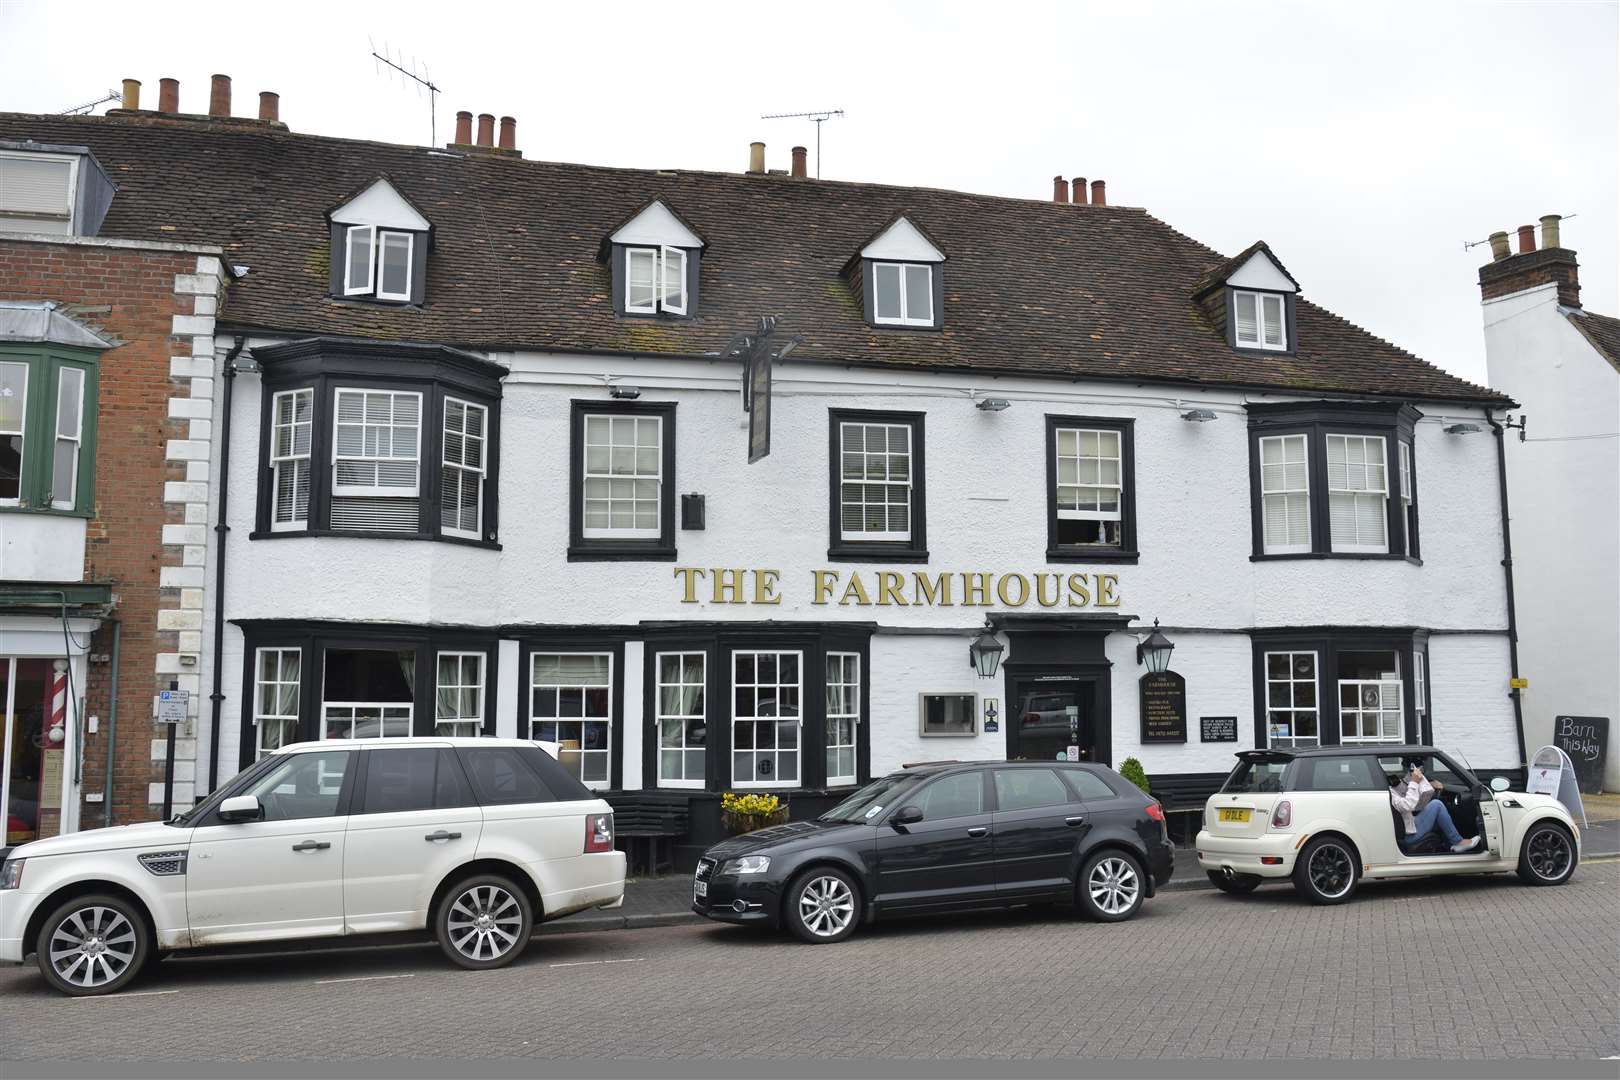 The Farm House pub in West Malling